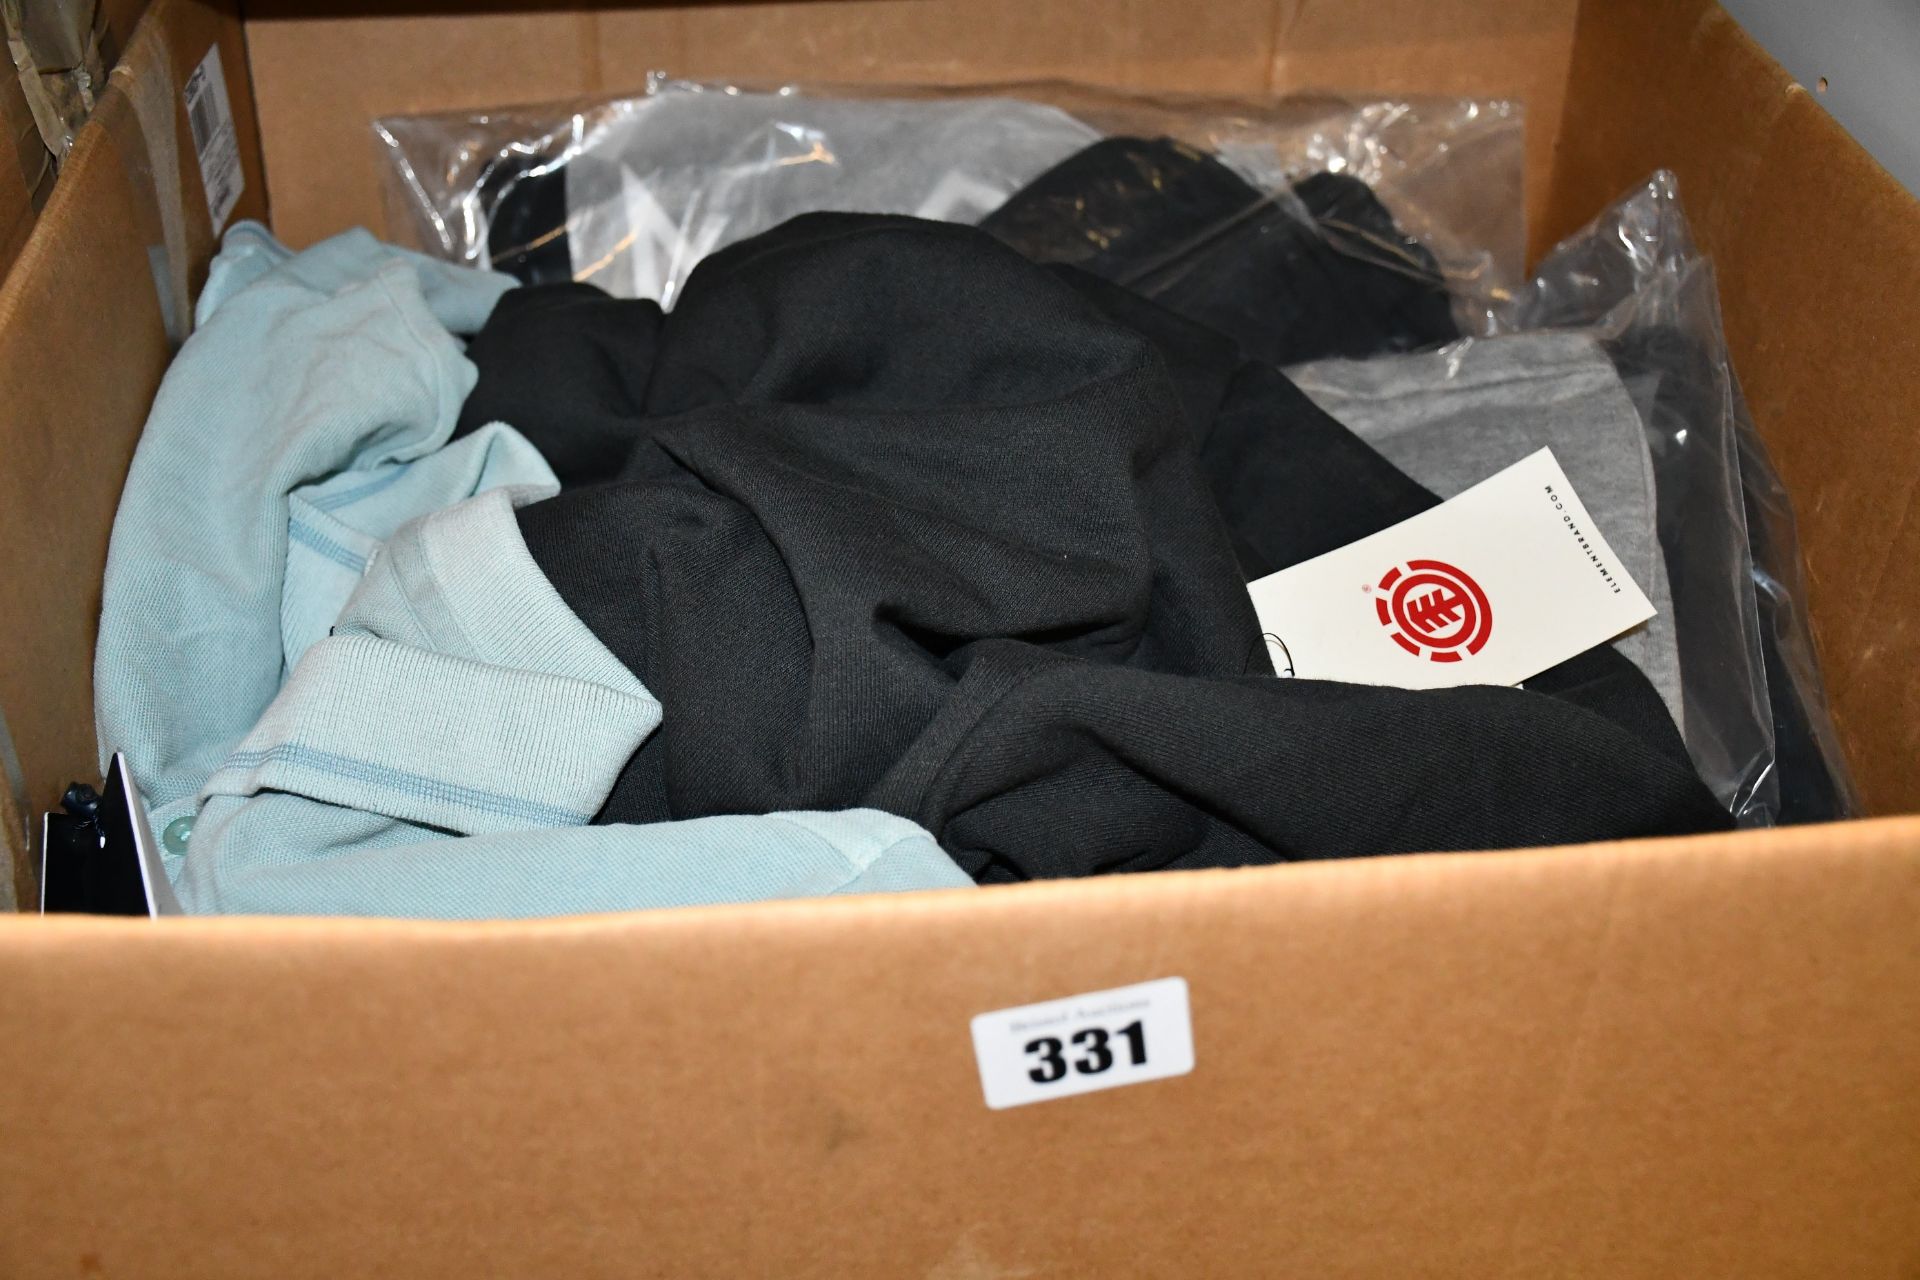 Eight assorted Element T-shirts, three Element hoodies, two Element sweatshirts and an Element